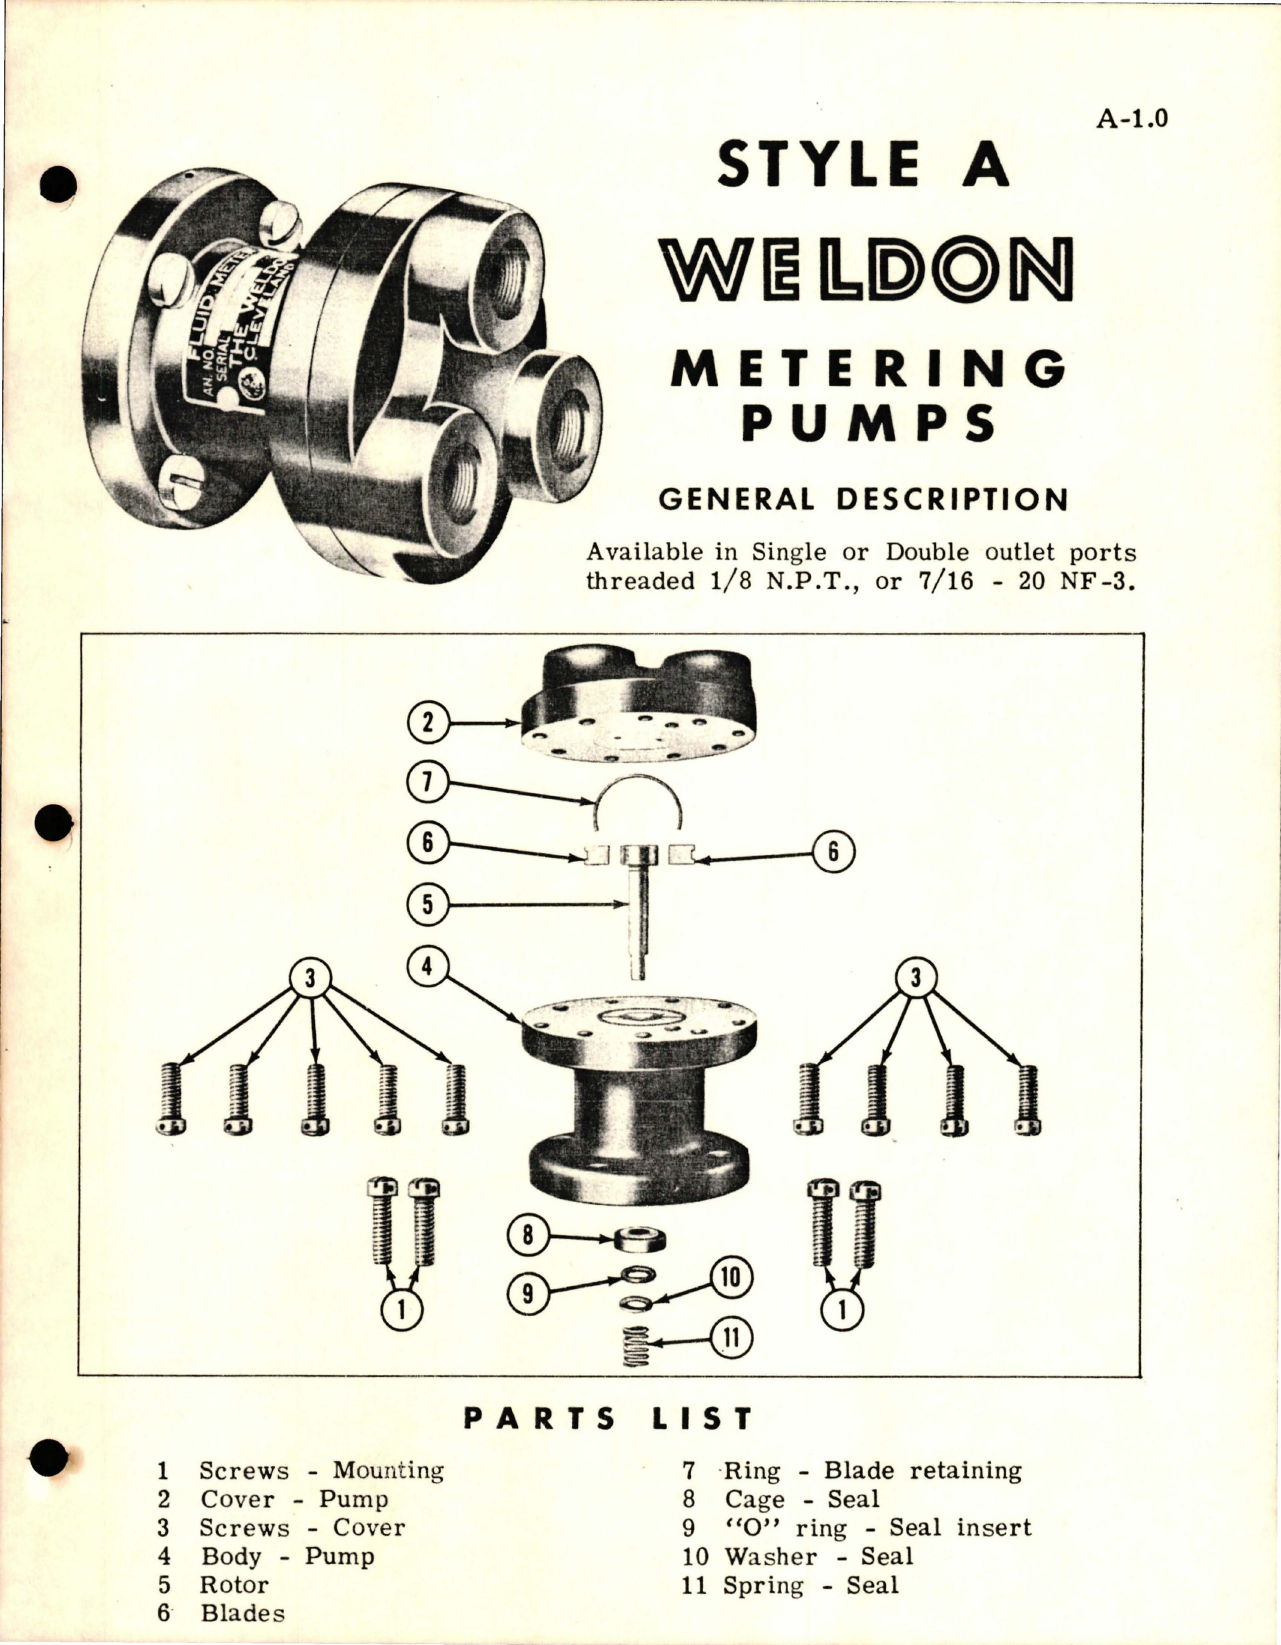 Sample page 1 from AirCorps Library document: Weldon Metering Pumps - Style A - General Description with Parts List 